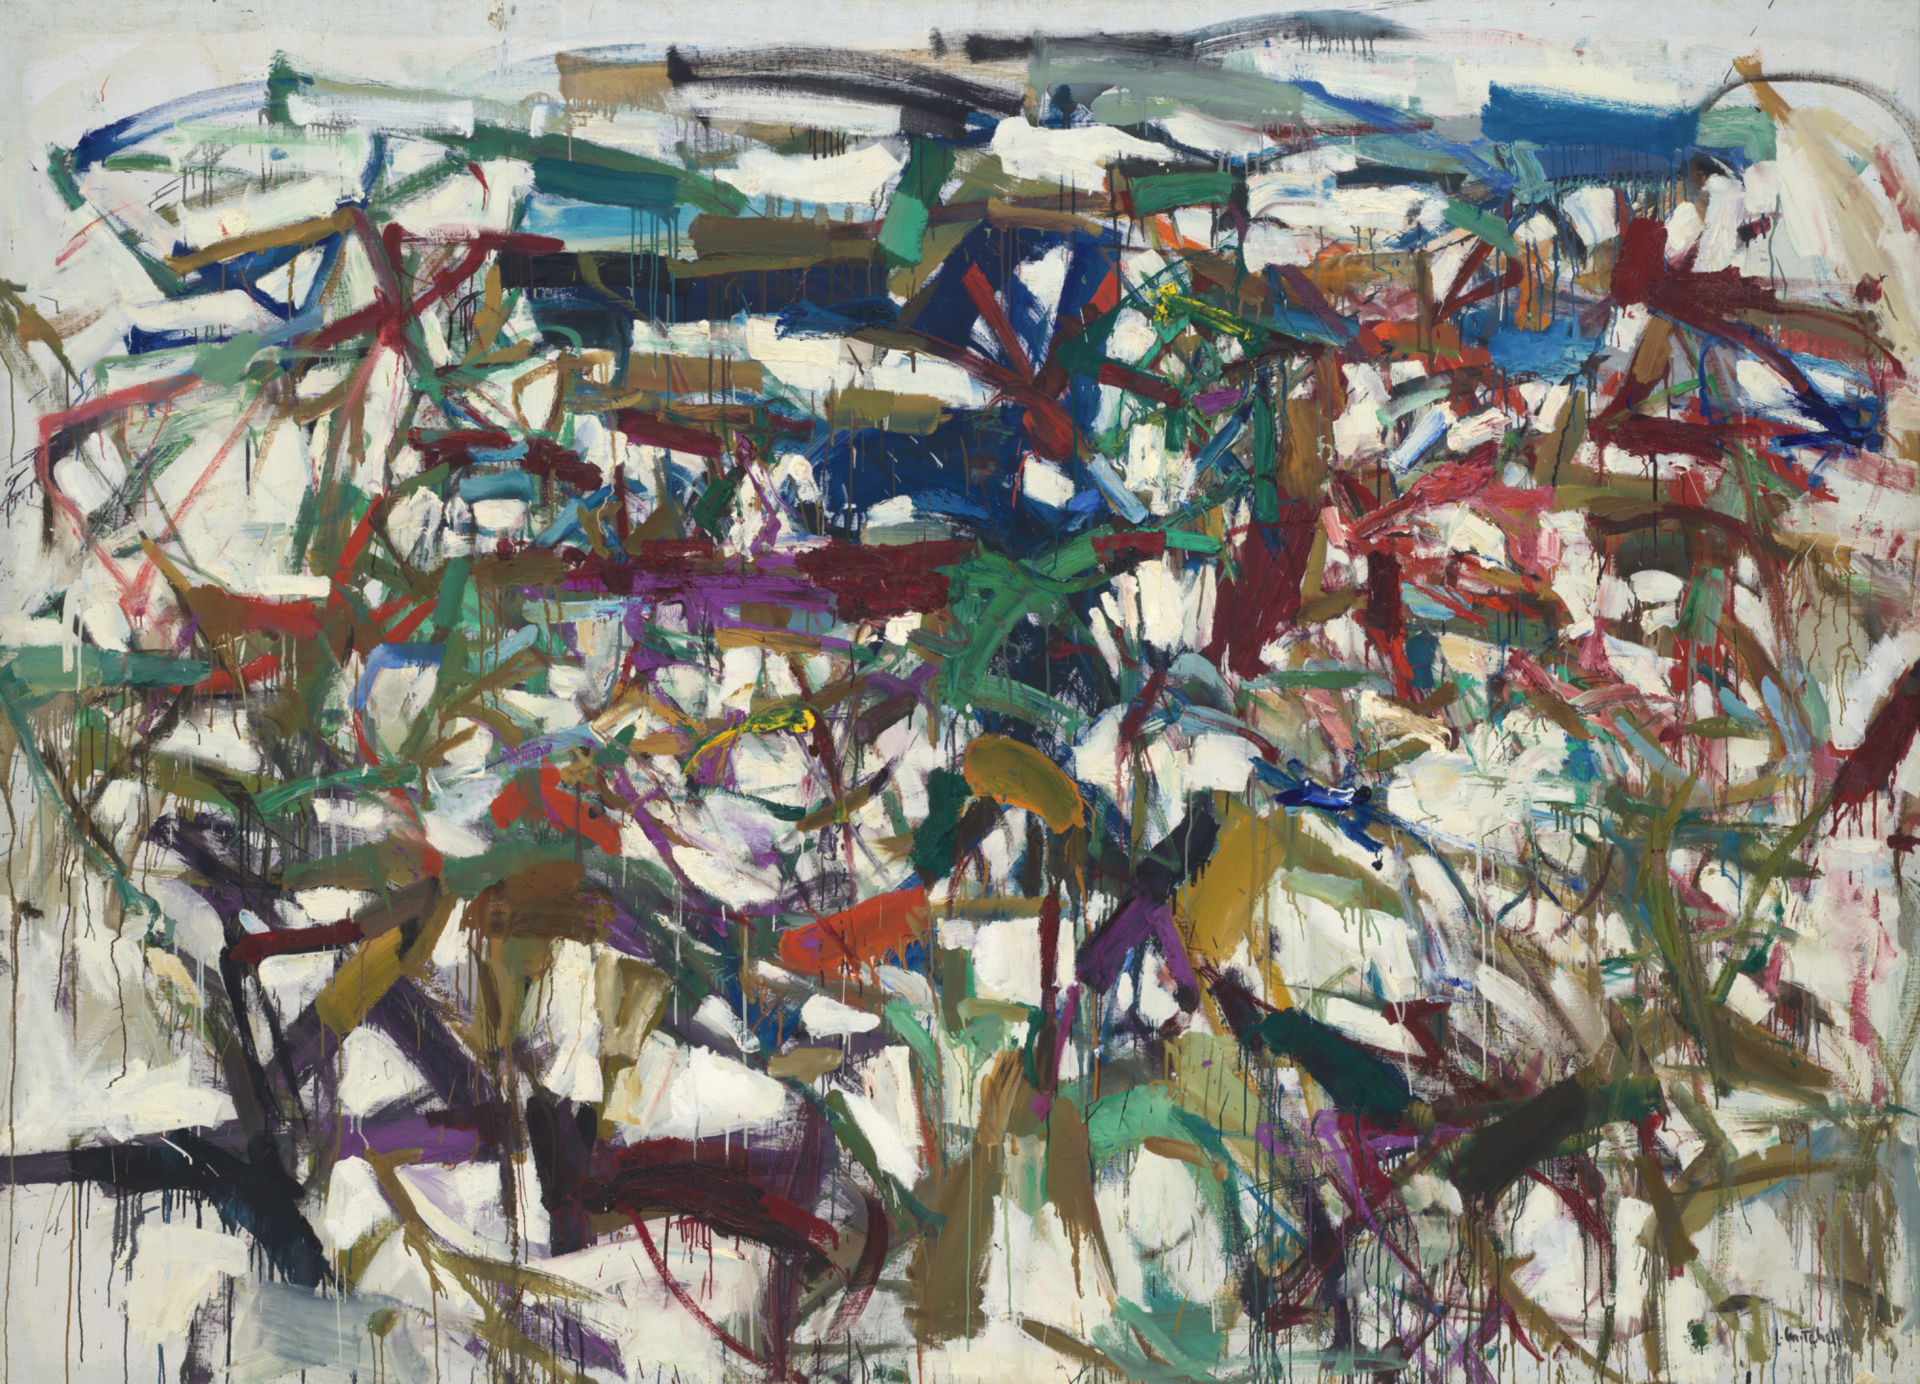 "Ladybug" by Joan Mitchell, 1957, an abstract expressionist painting with dynamic brushstrokes and vibrant colors forming a constellation composition.